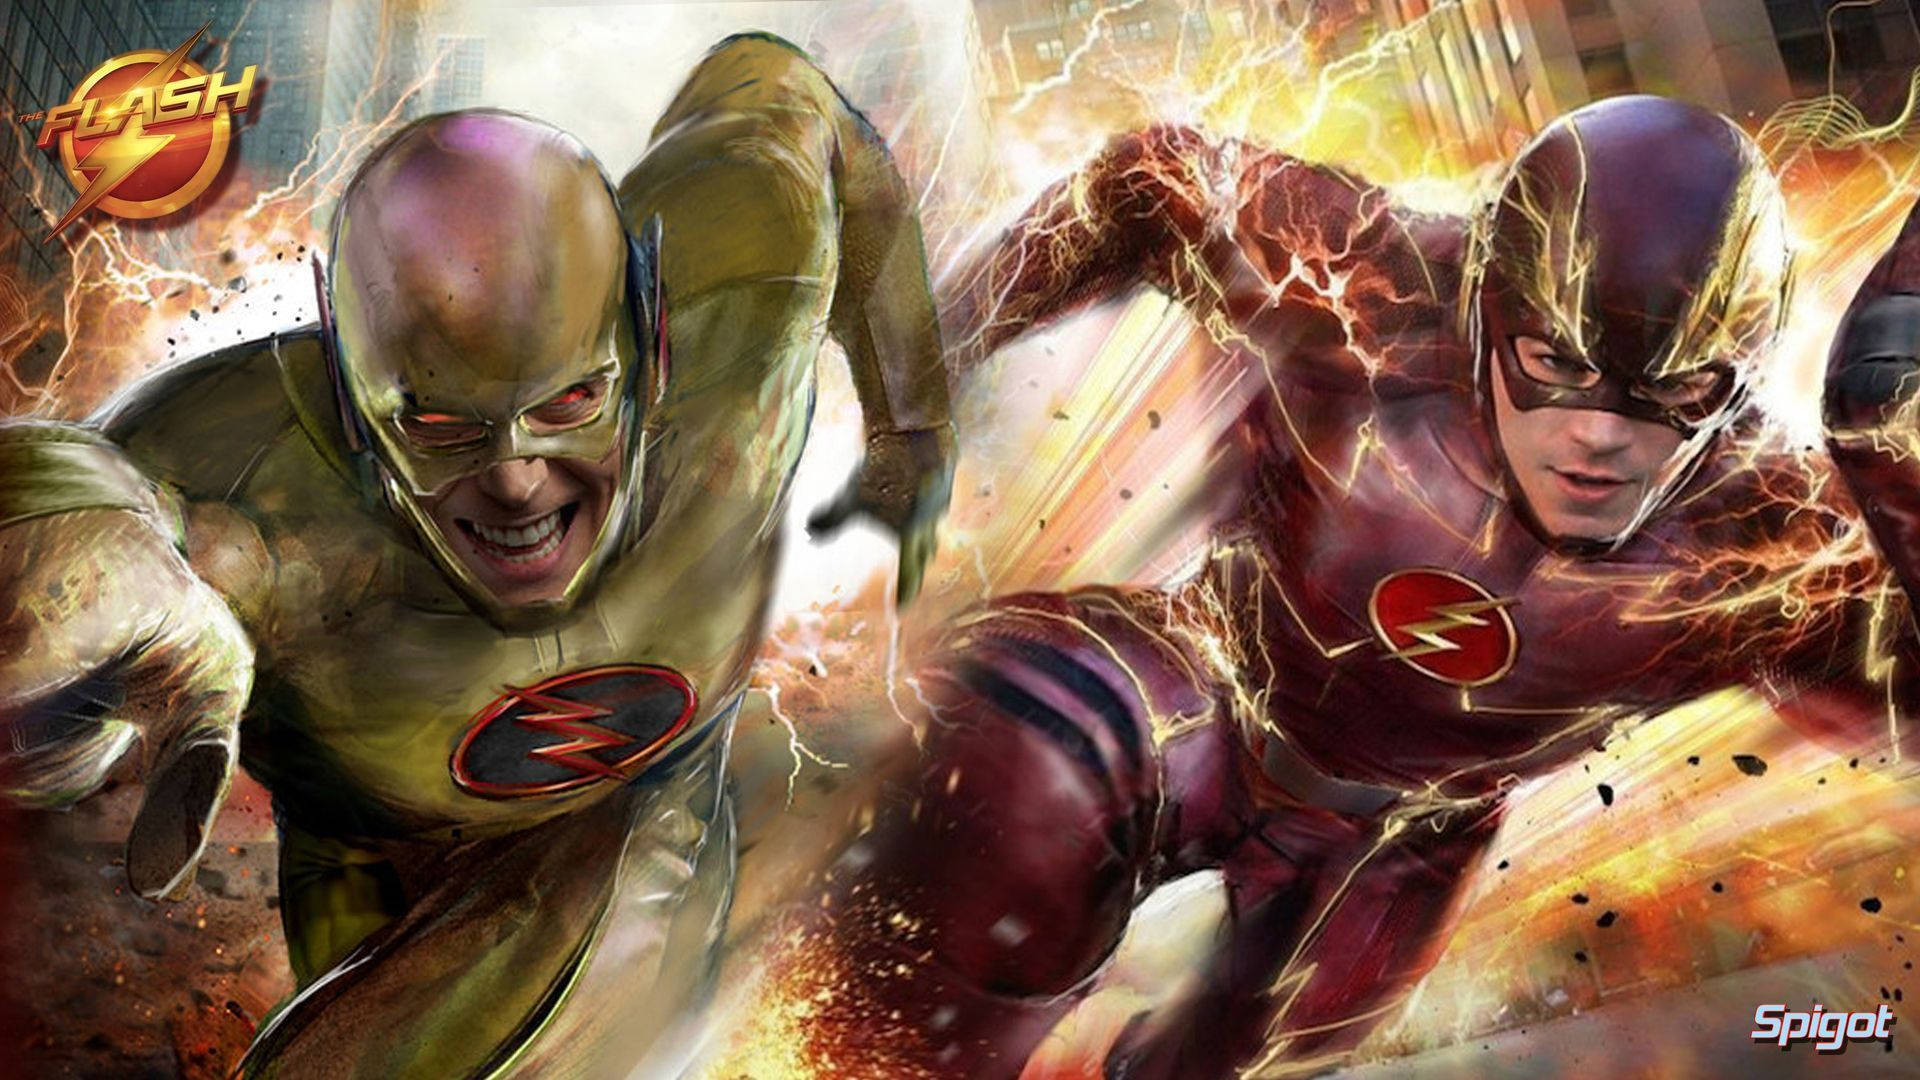 The Flash 1920X1080 Wallpaper and Background Image